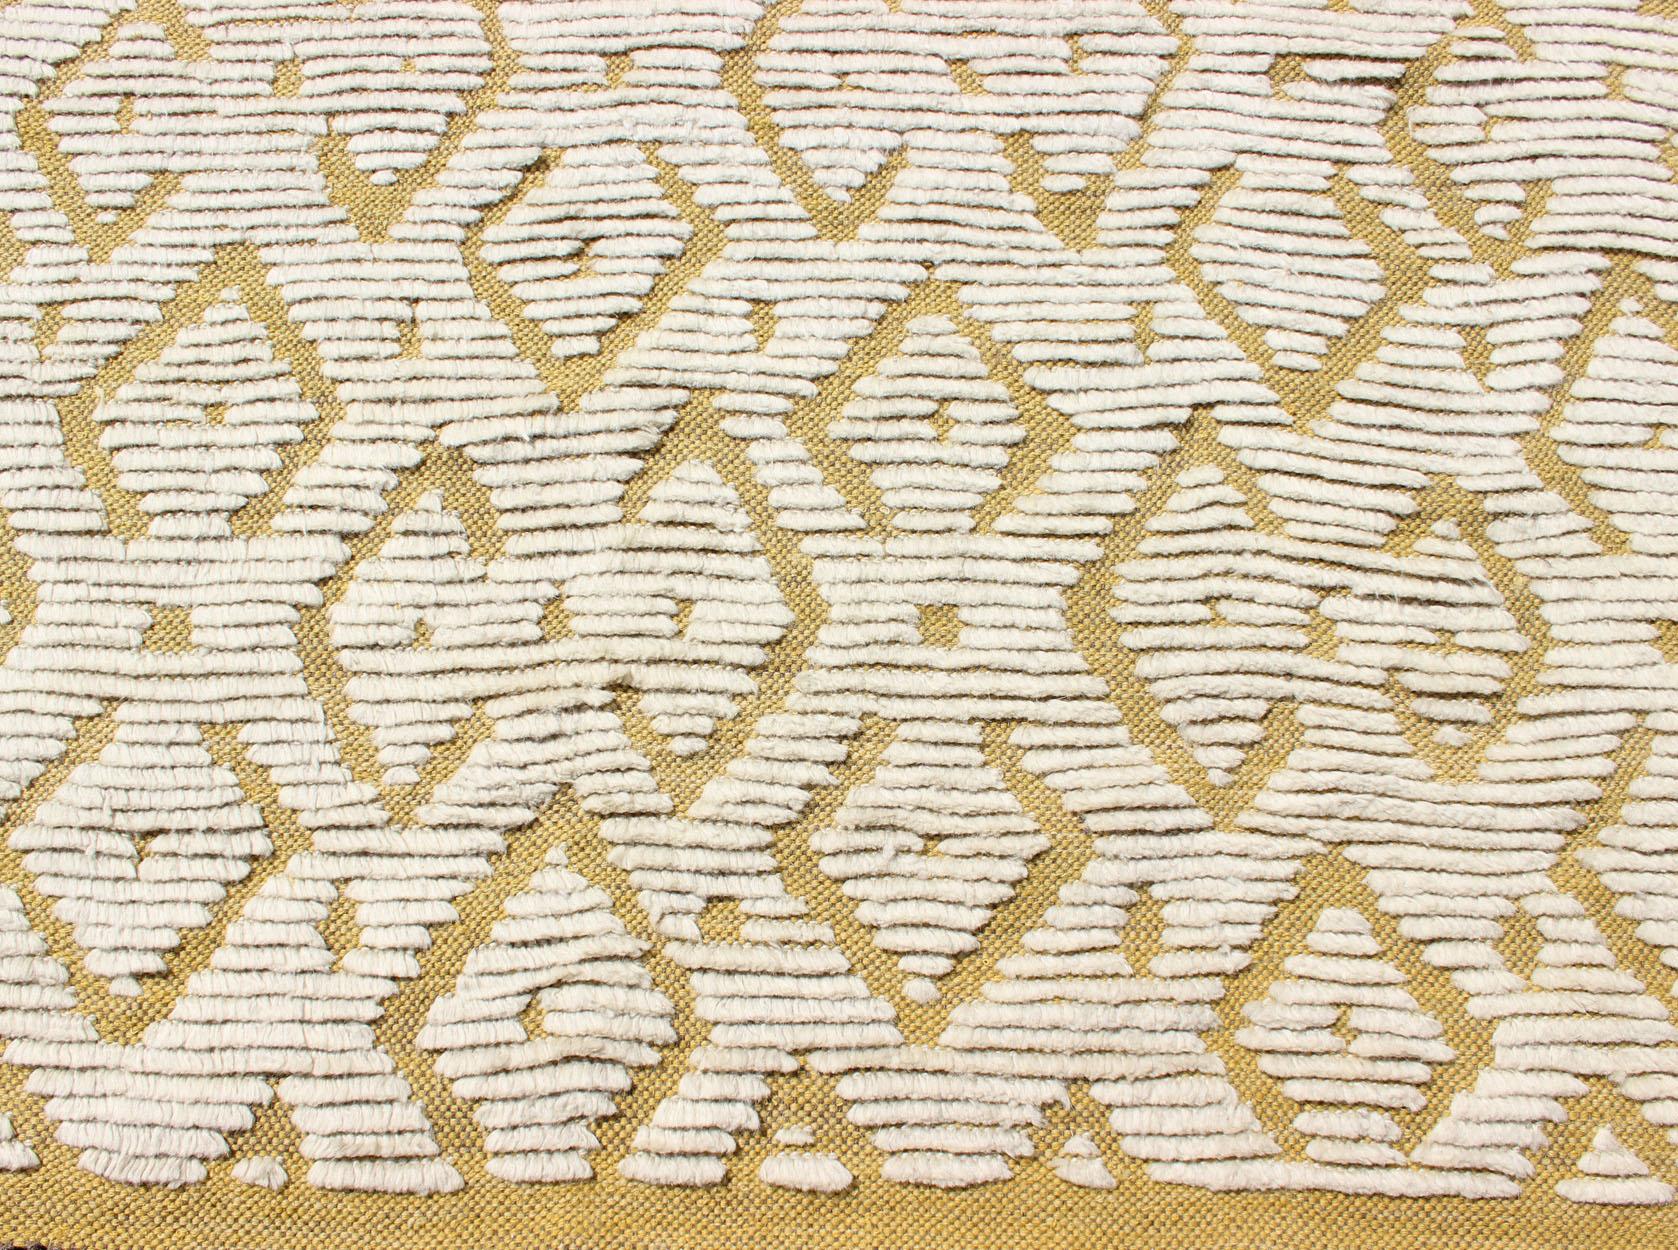 Modern Hand-Knotted Rug in Wool with Diamond Design in Marigold and Cream

This modern Indian rug has been hand-knotted in wool and features an all-over, sub-geometric diamond design rendered in marigold and cream tones; making it a marvelous fit